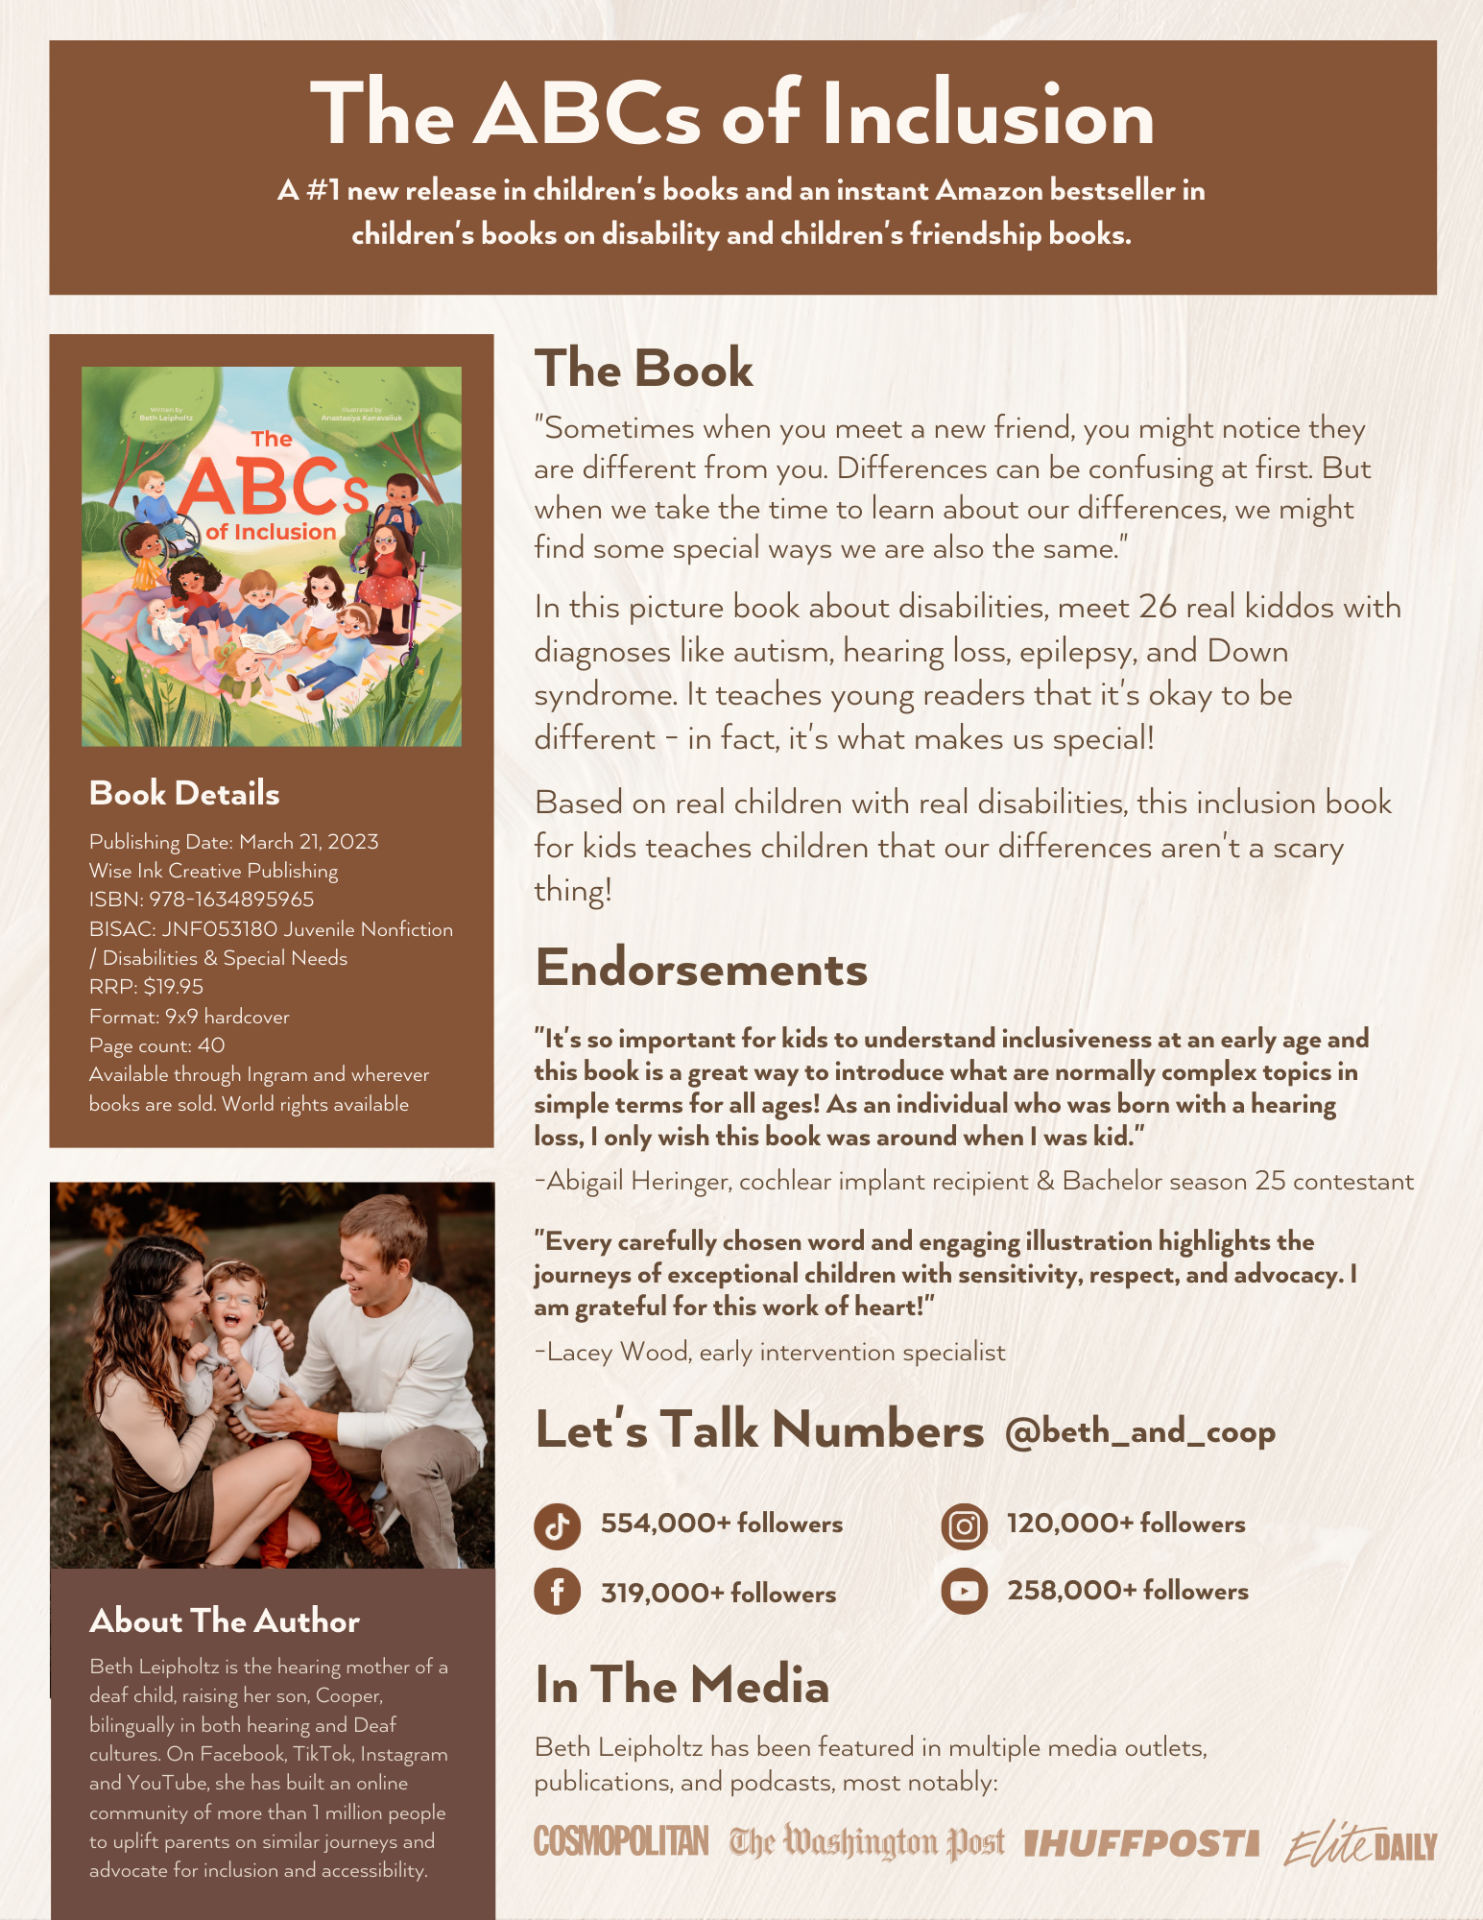 The ABCs of Inclusion: Celebrating diversity and friendship in children's literature, including discussions about disabilities - a heartwarming new release advocating for understanding and acceptance among young readers, featuring endorsements and